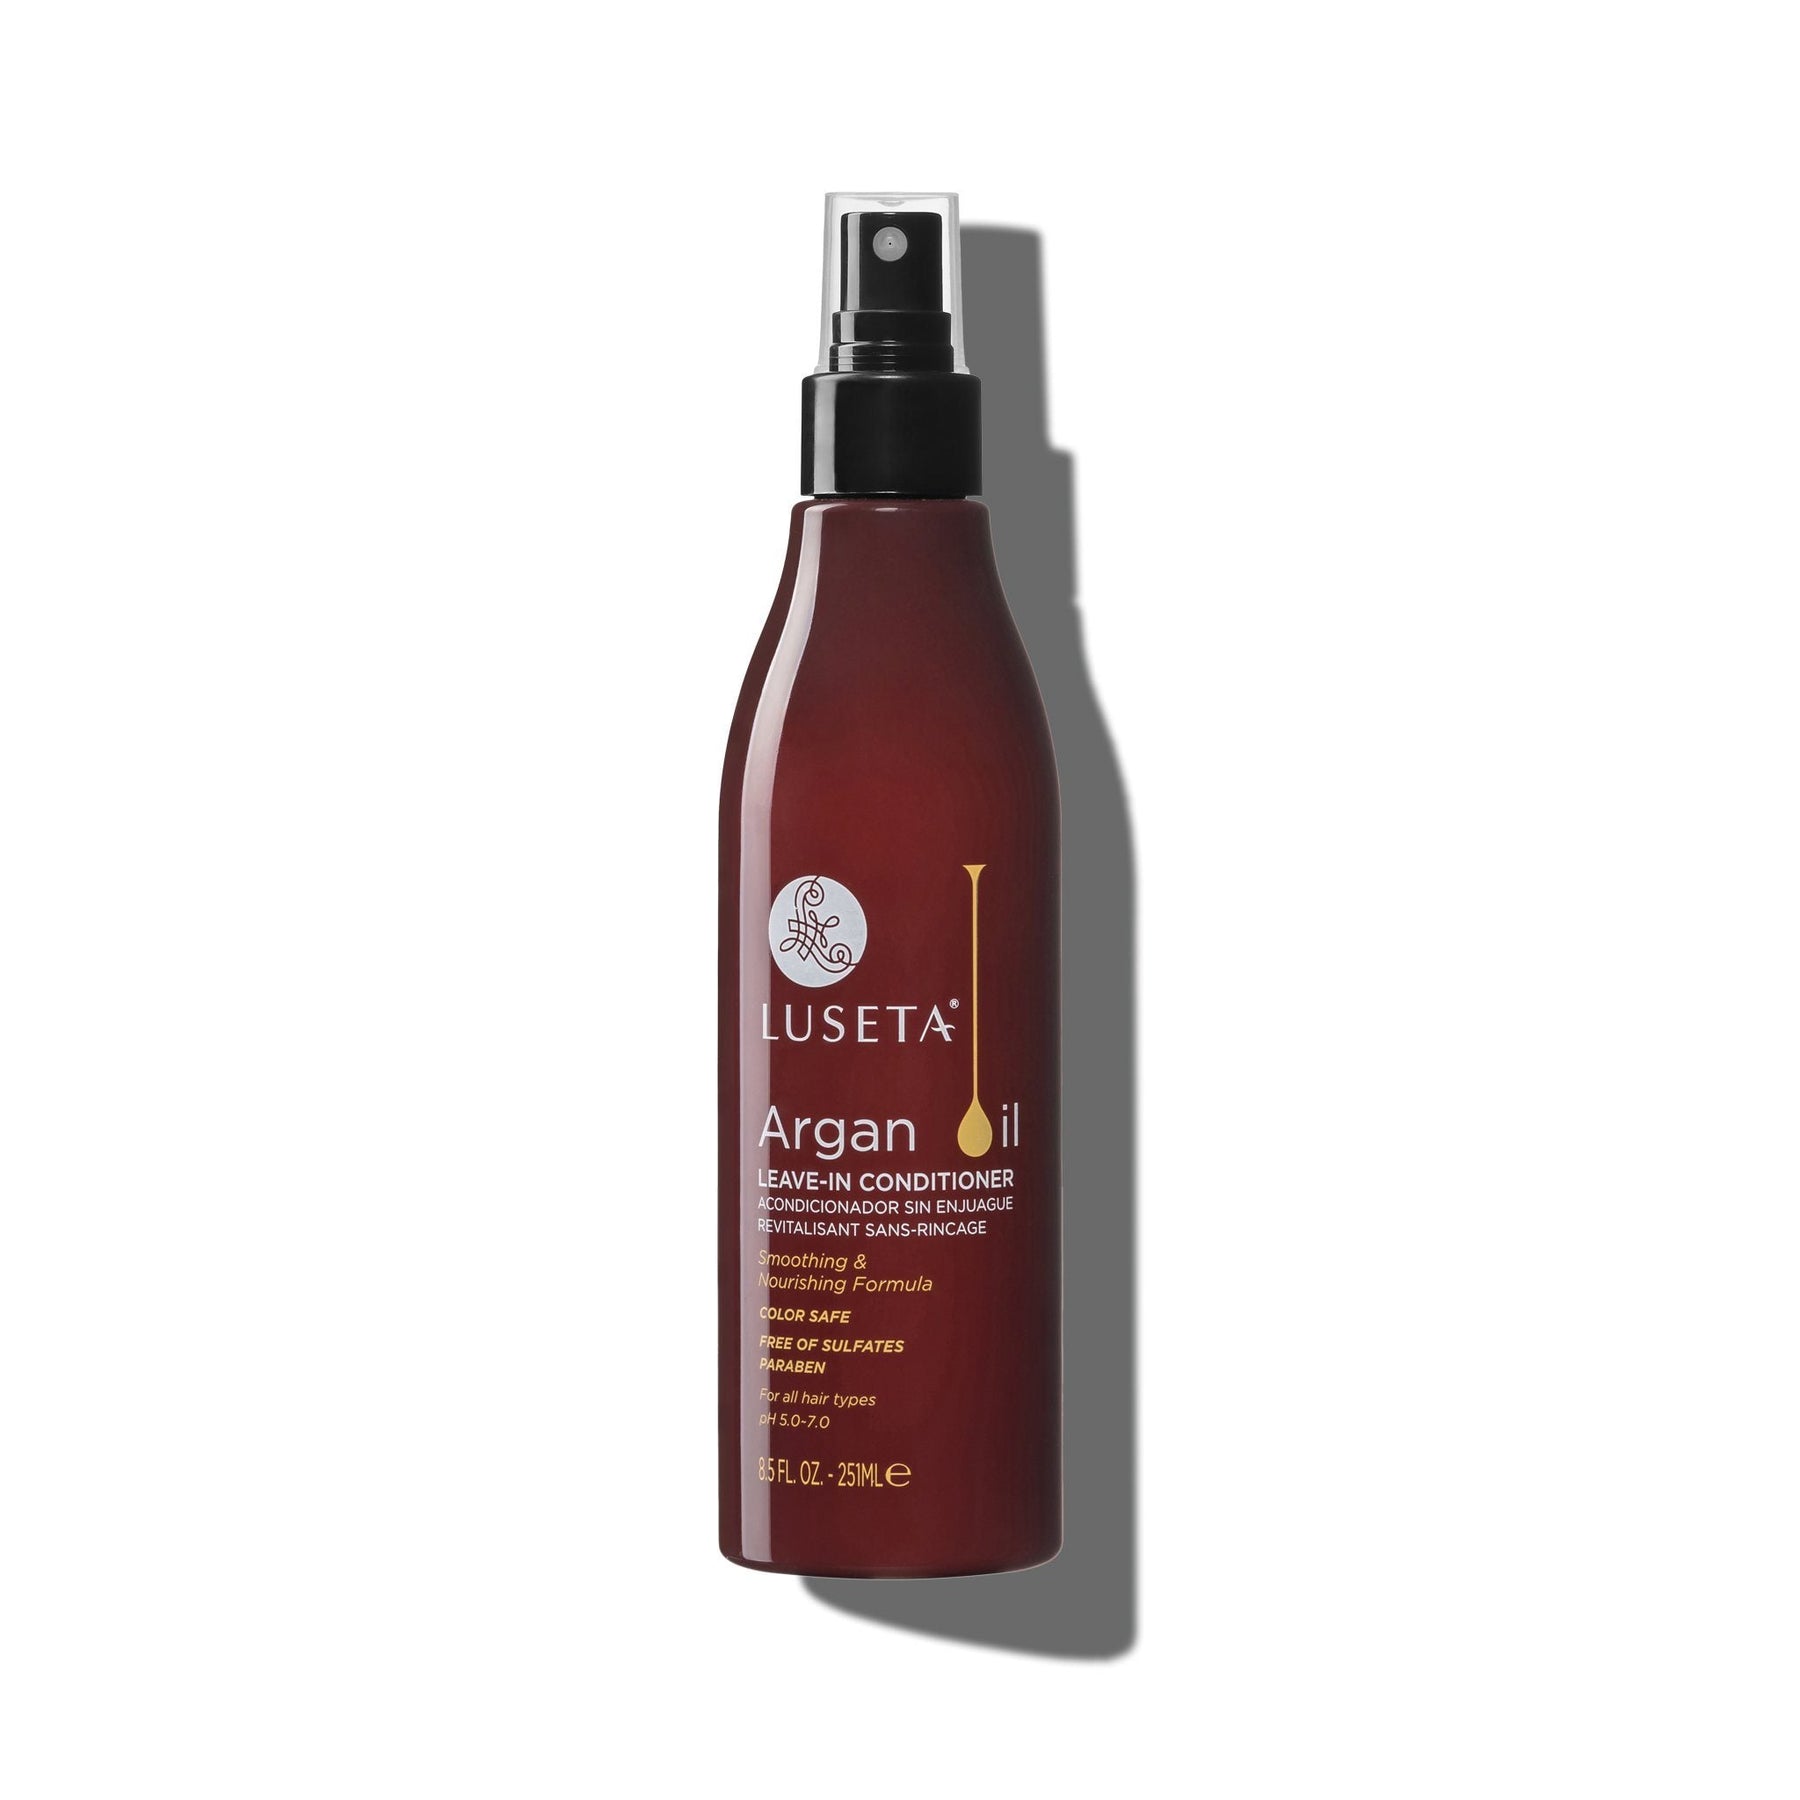 Argan Oil Leave-in Conditioner - by Luseta Beauty |ProCare Outlet|